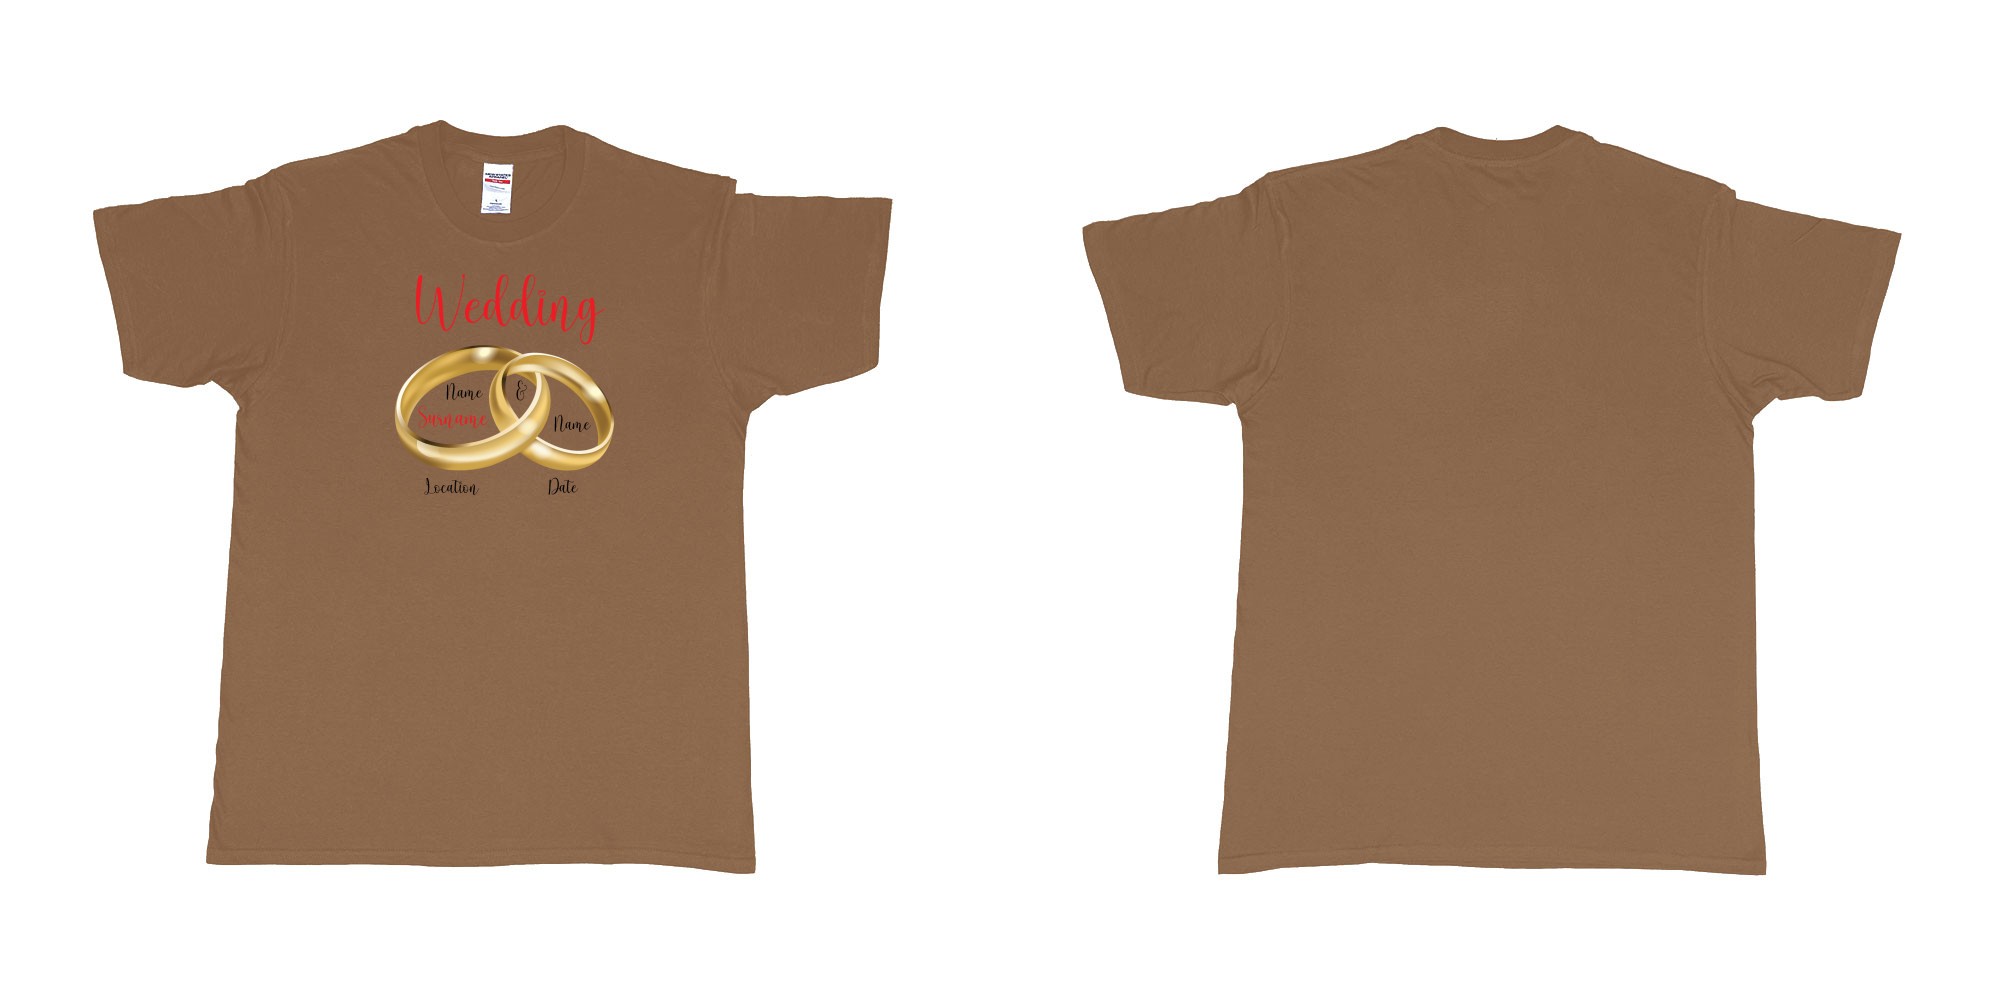 Custom tshirt design wedding rings in fabric color chestnut choice your own text made in Bali by The Pirate Way